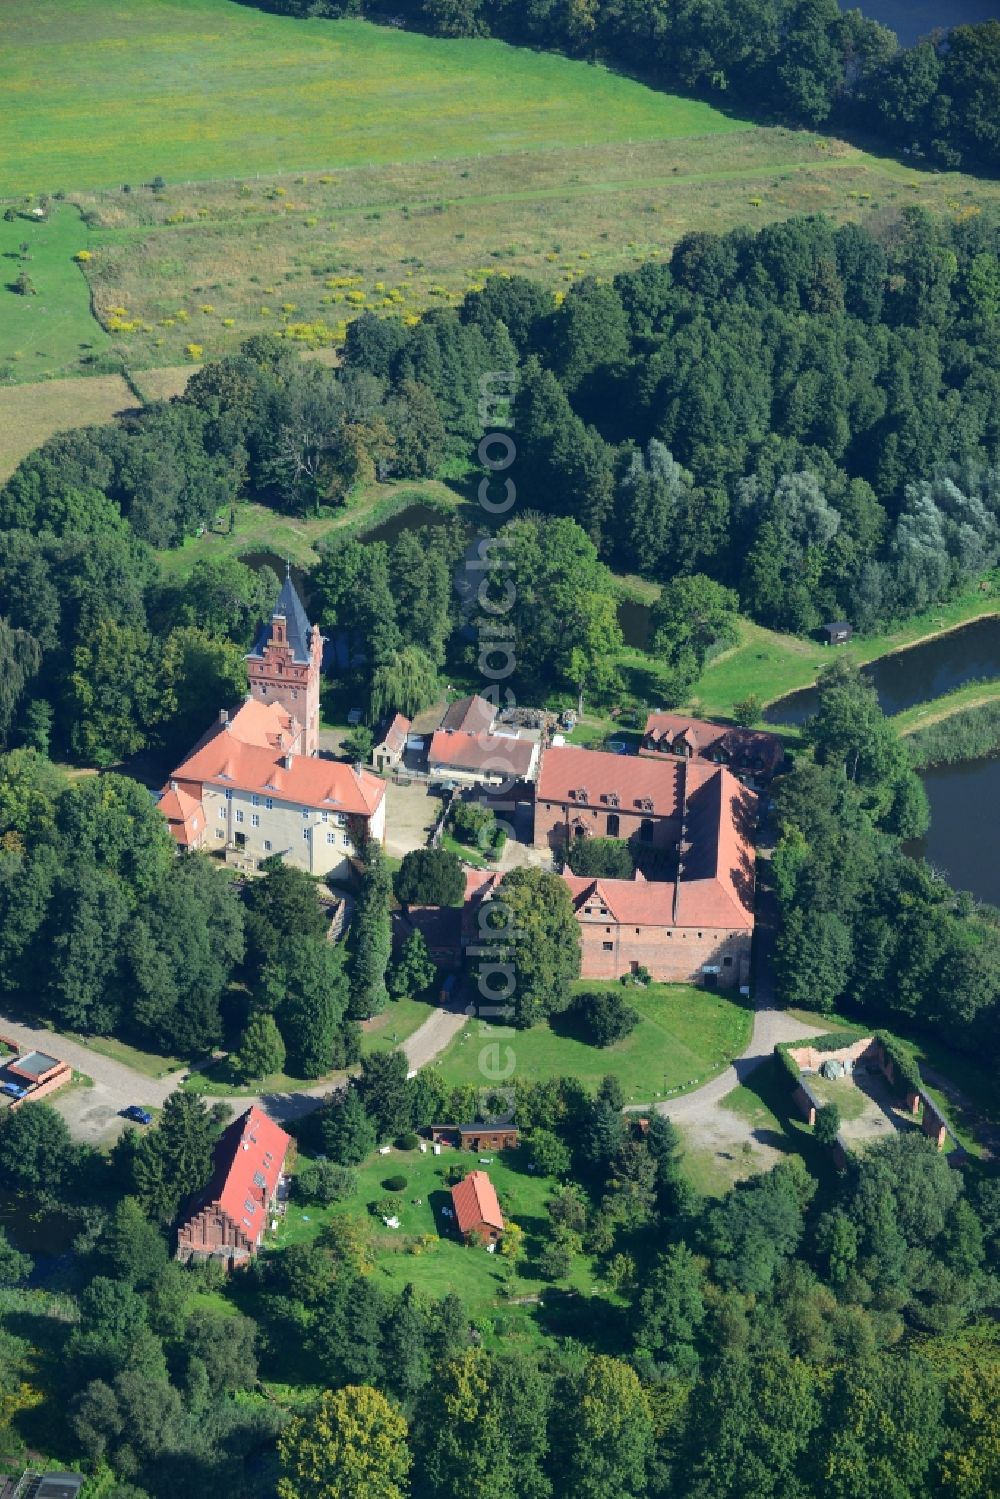 Aerial photograph Plattenburg - Plate castle - a moated castle in the office free community plate castle district Prignitz in the northwest of Brandenburg